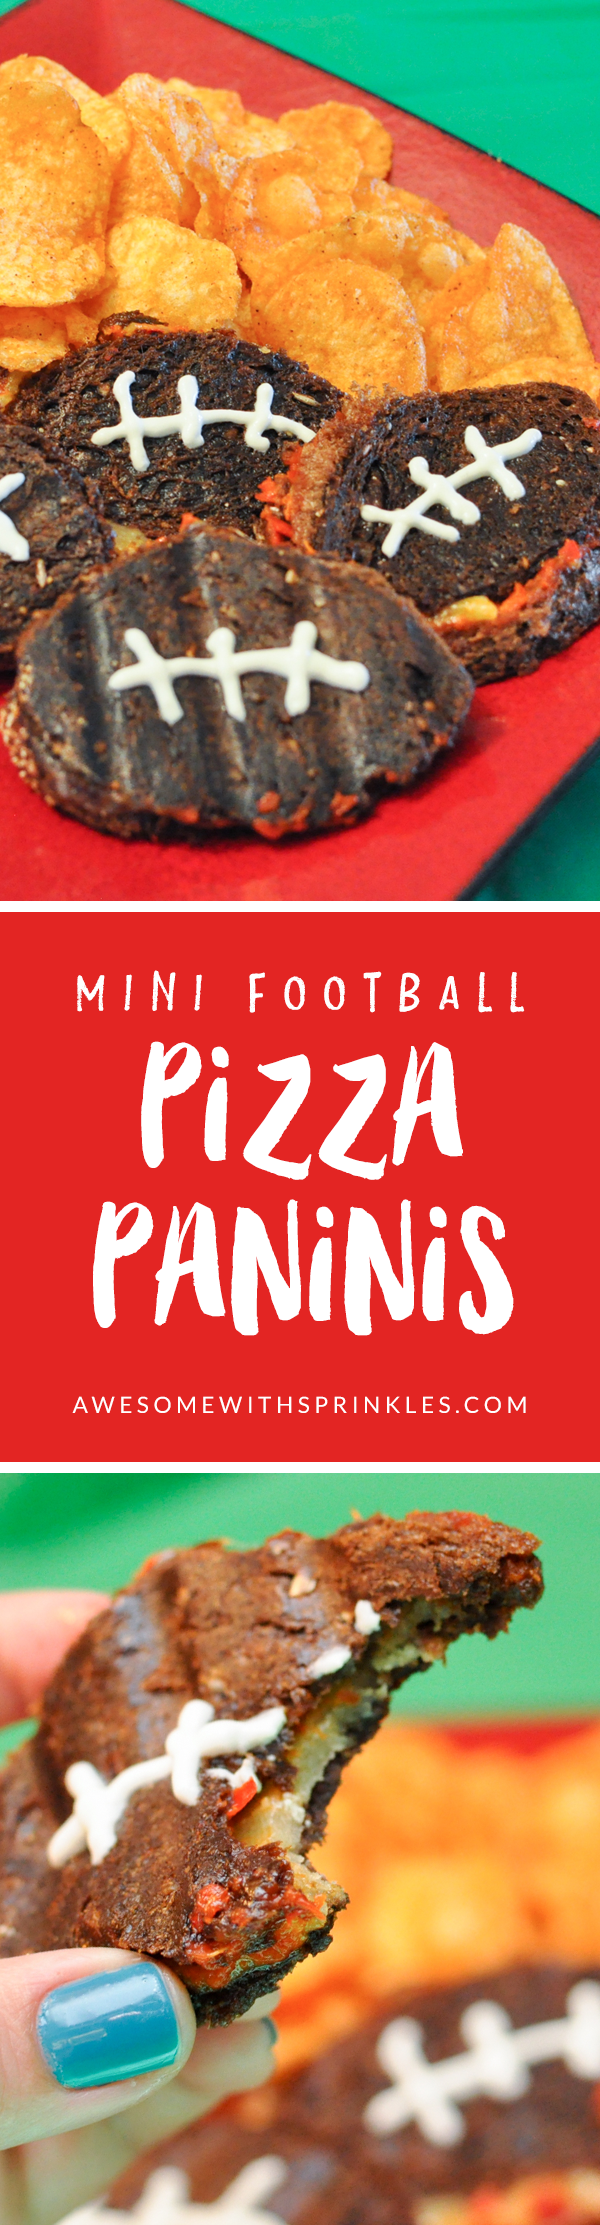 Mini Football Pizza Panini Sandwiches | Awesome with Sprinkles